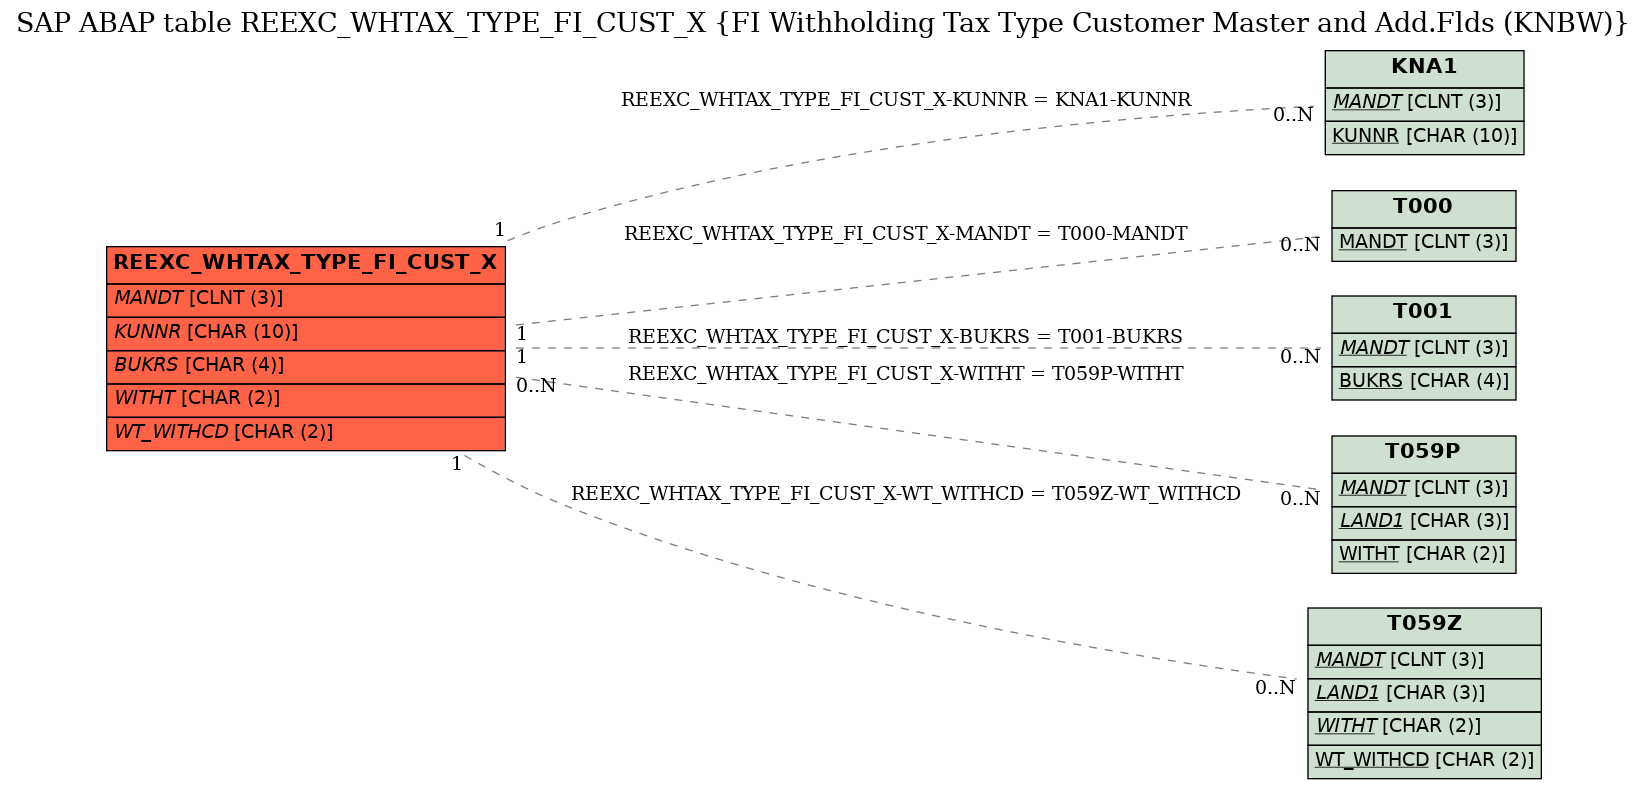 E-R Diagram for table REEXC_WHTAX_TYPE_FI_CUST_X (FI Withholding Tax Type Customer Master and Add.Flds (KNBW))